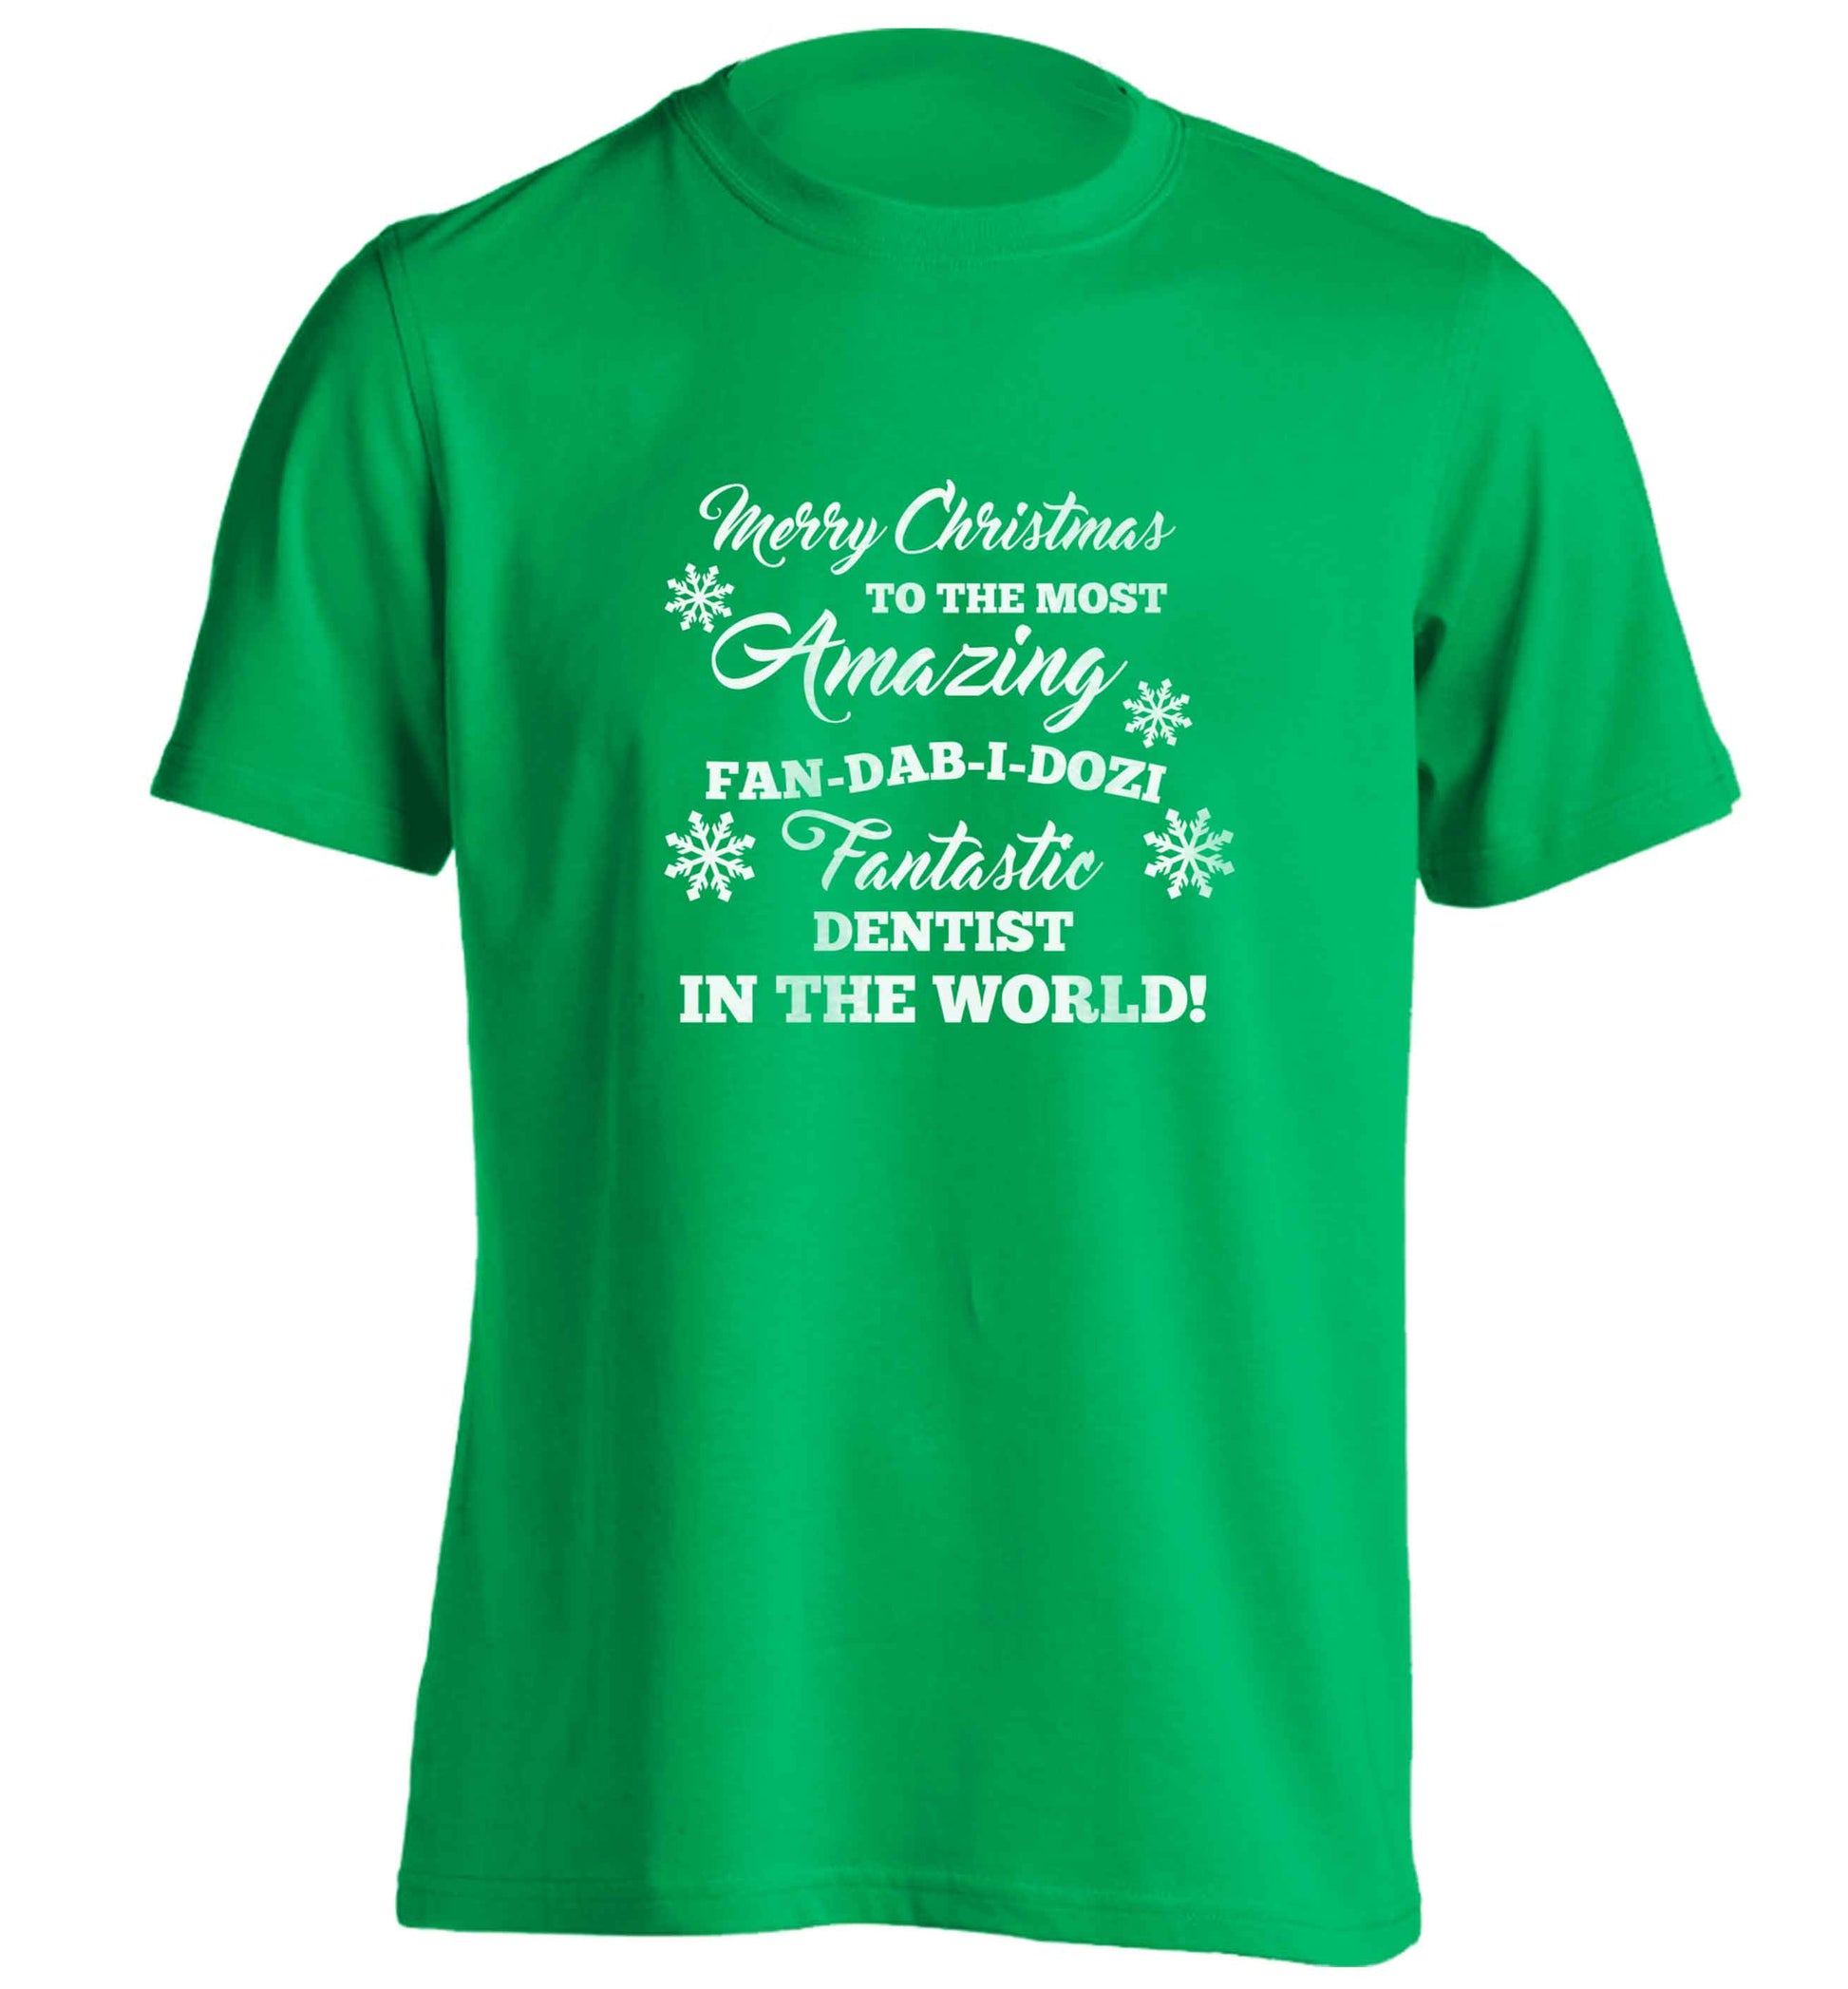 Merry Christmas to the most amazing dentist in the world! adults unisex green Tshirt 2XL